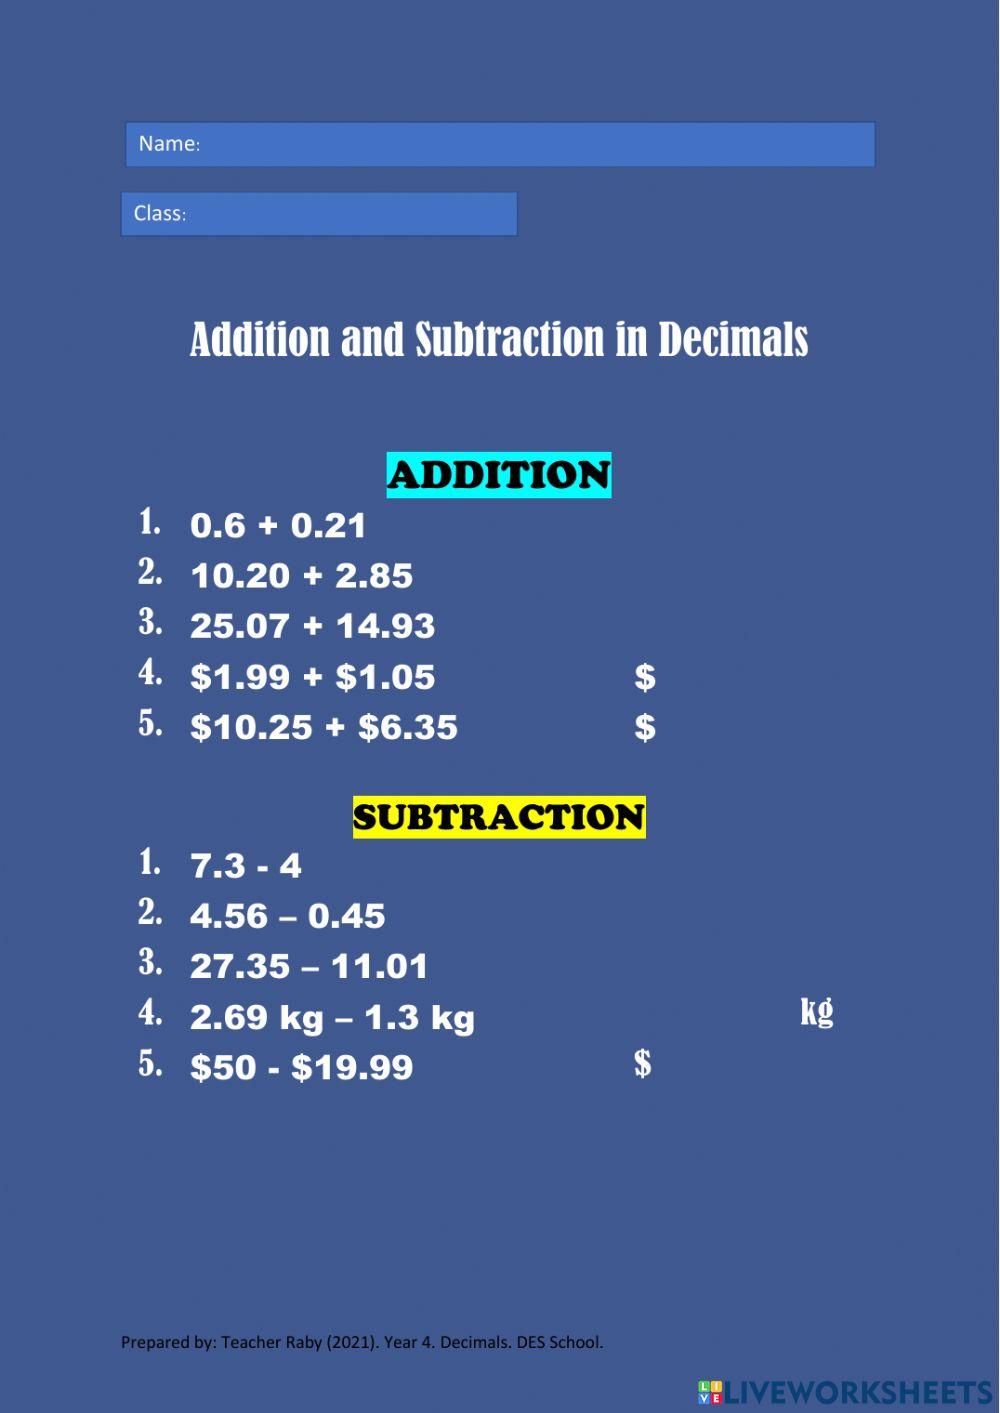 Addition and subtraction in decimals